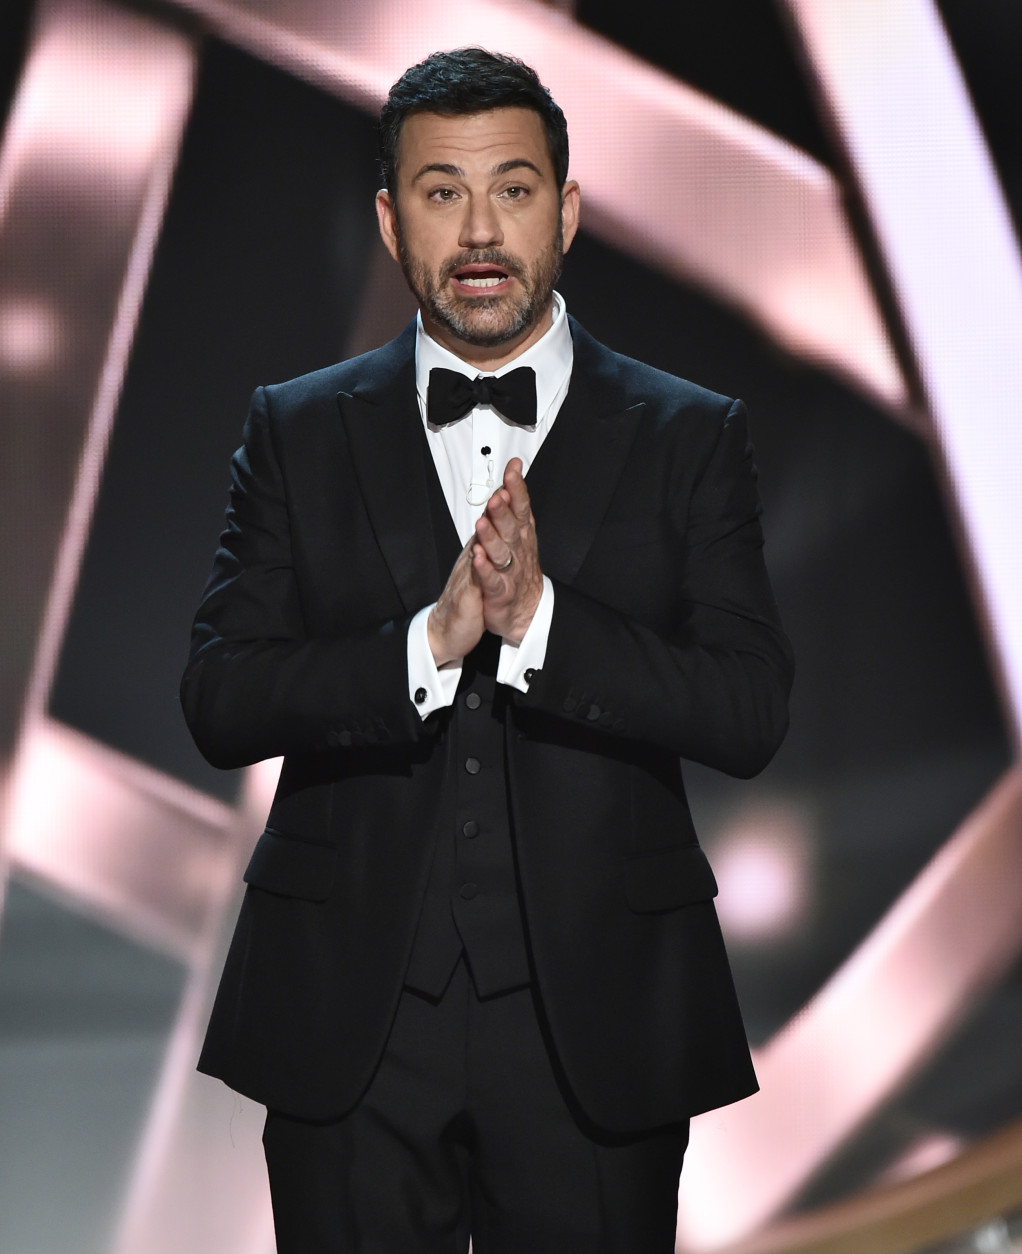 Host Jimmy Kimmel appears at the 68th Primetime Emmy Awards on Sunday, Sept. 18, 2016, at the Microsoft Theater in Los Angeles. (Photo by Vince Bucci/Invision for the Television Academy/AP Images)